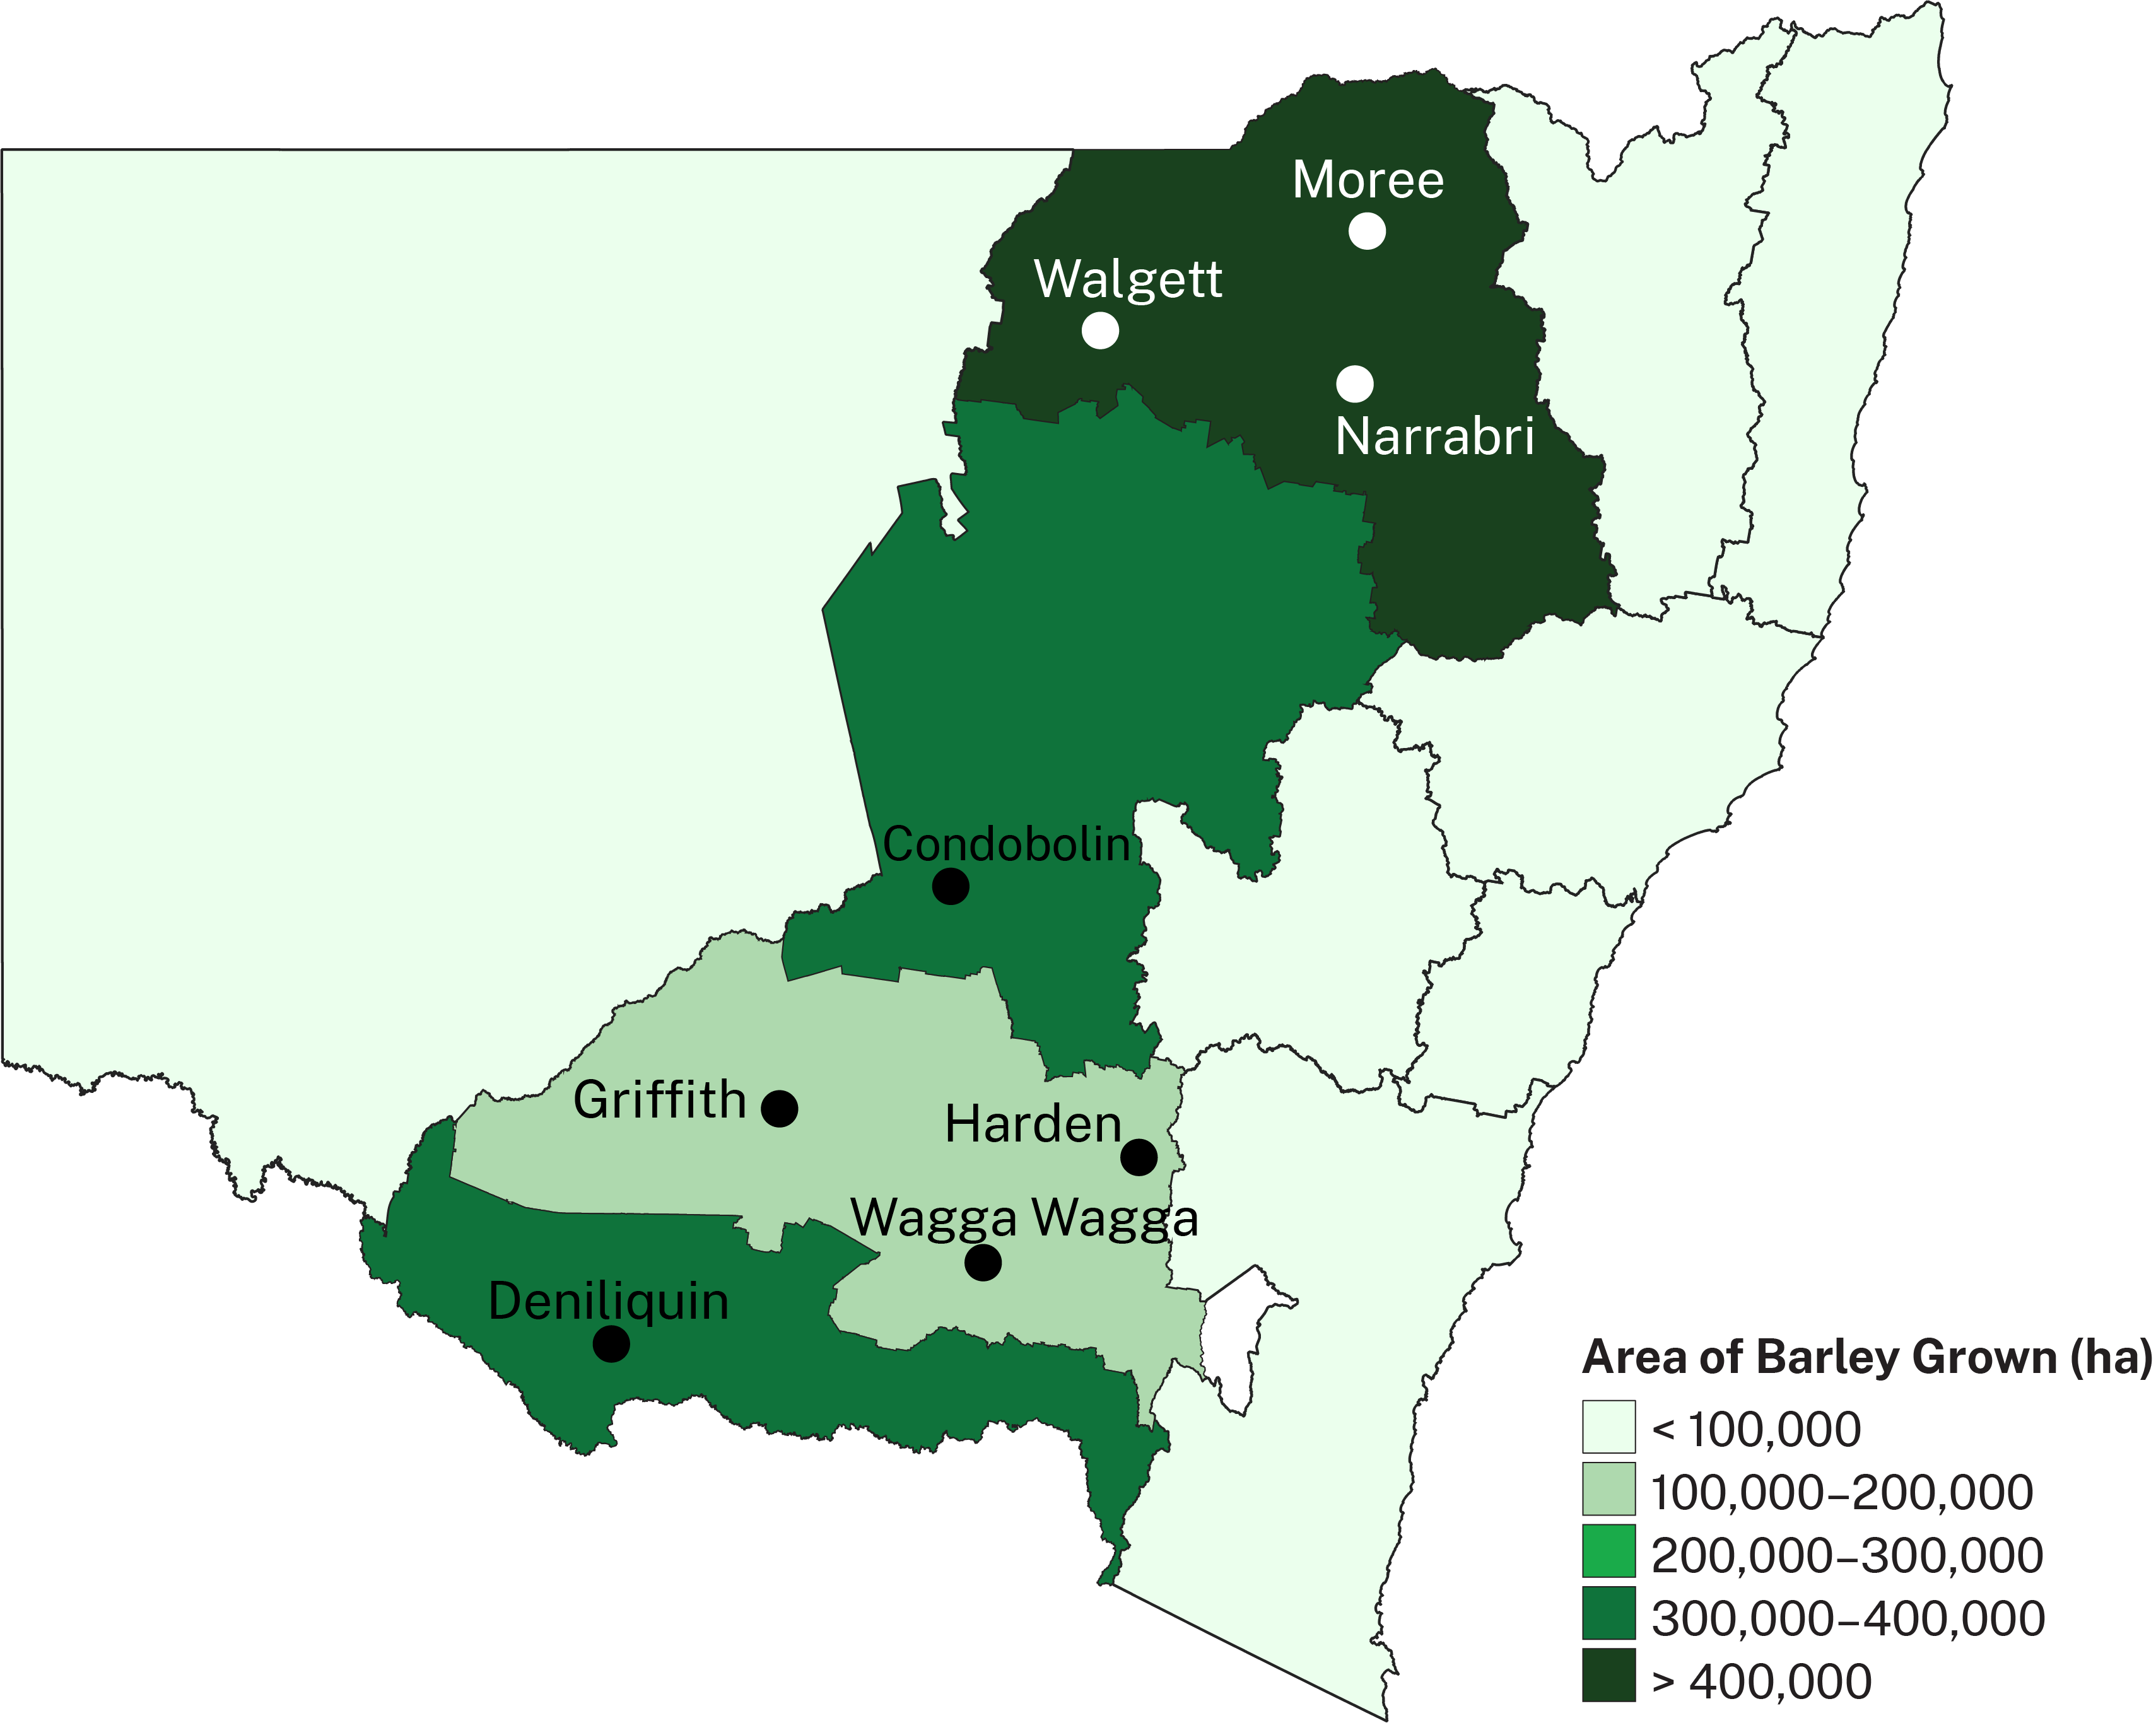 Barley in NSW is grown in a belt west of the Great Dividing Range, stretching from Victoria to Queensland.